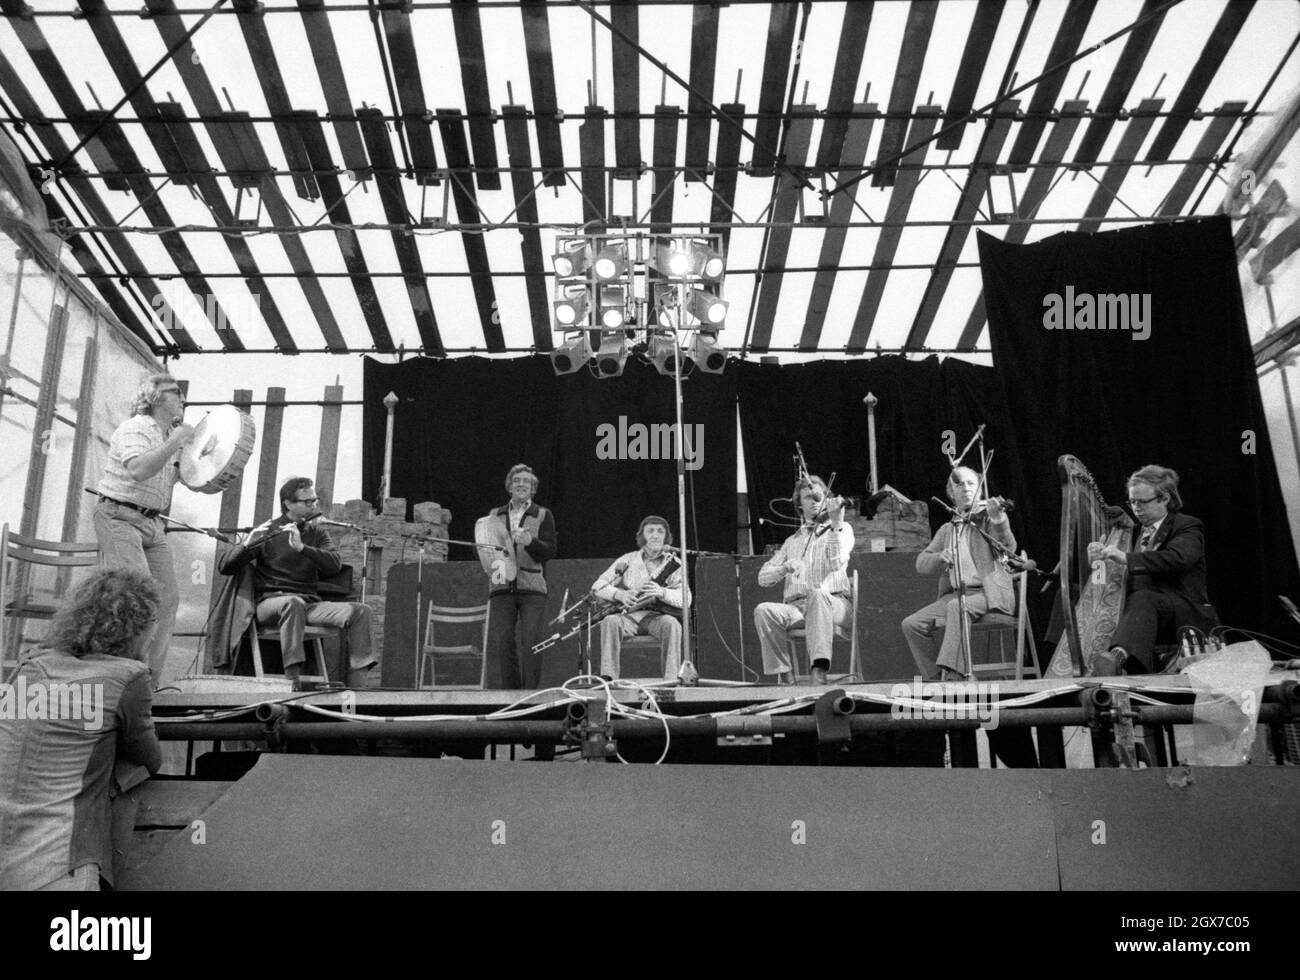 Irish folk band The Chieftains performlng at the July Wakes folk festival in Chorley, Lancashire, England on 25 July 1976. Stock Photo